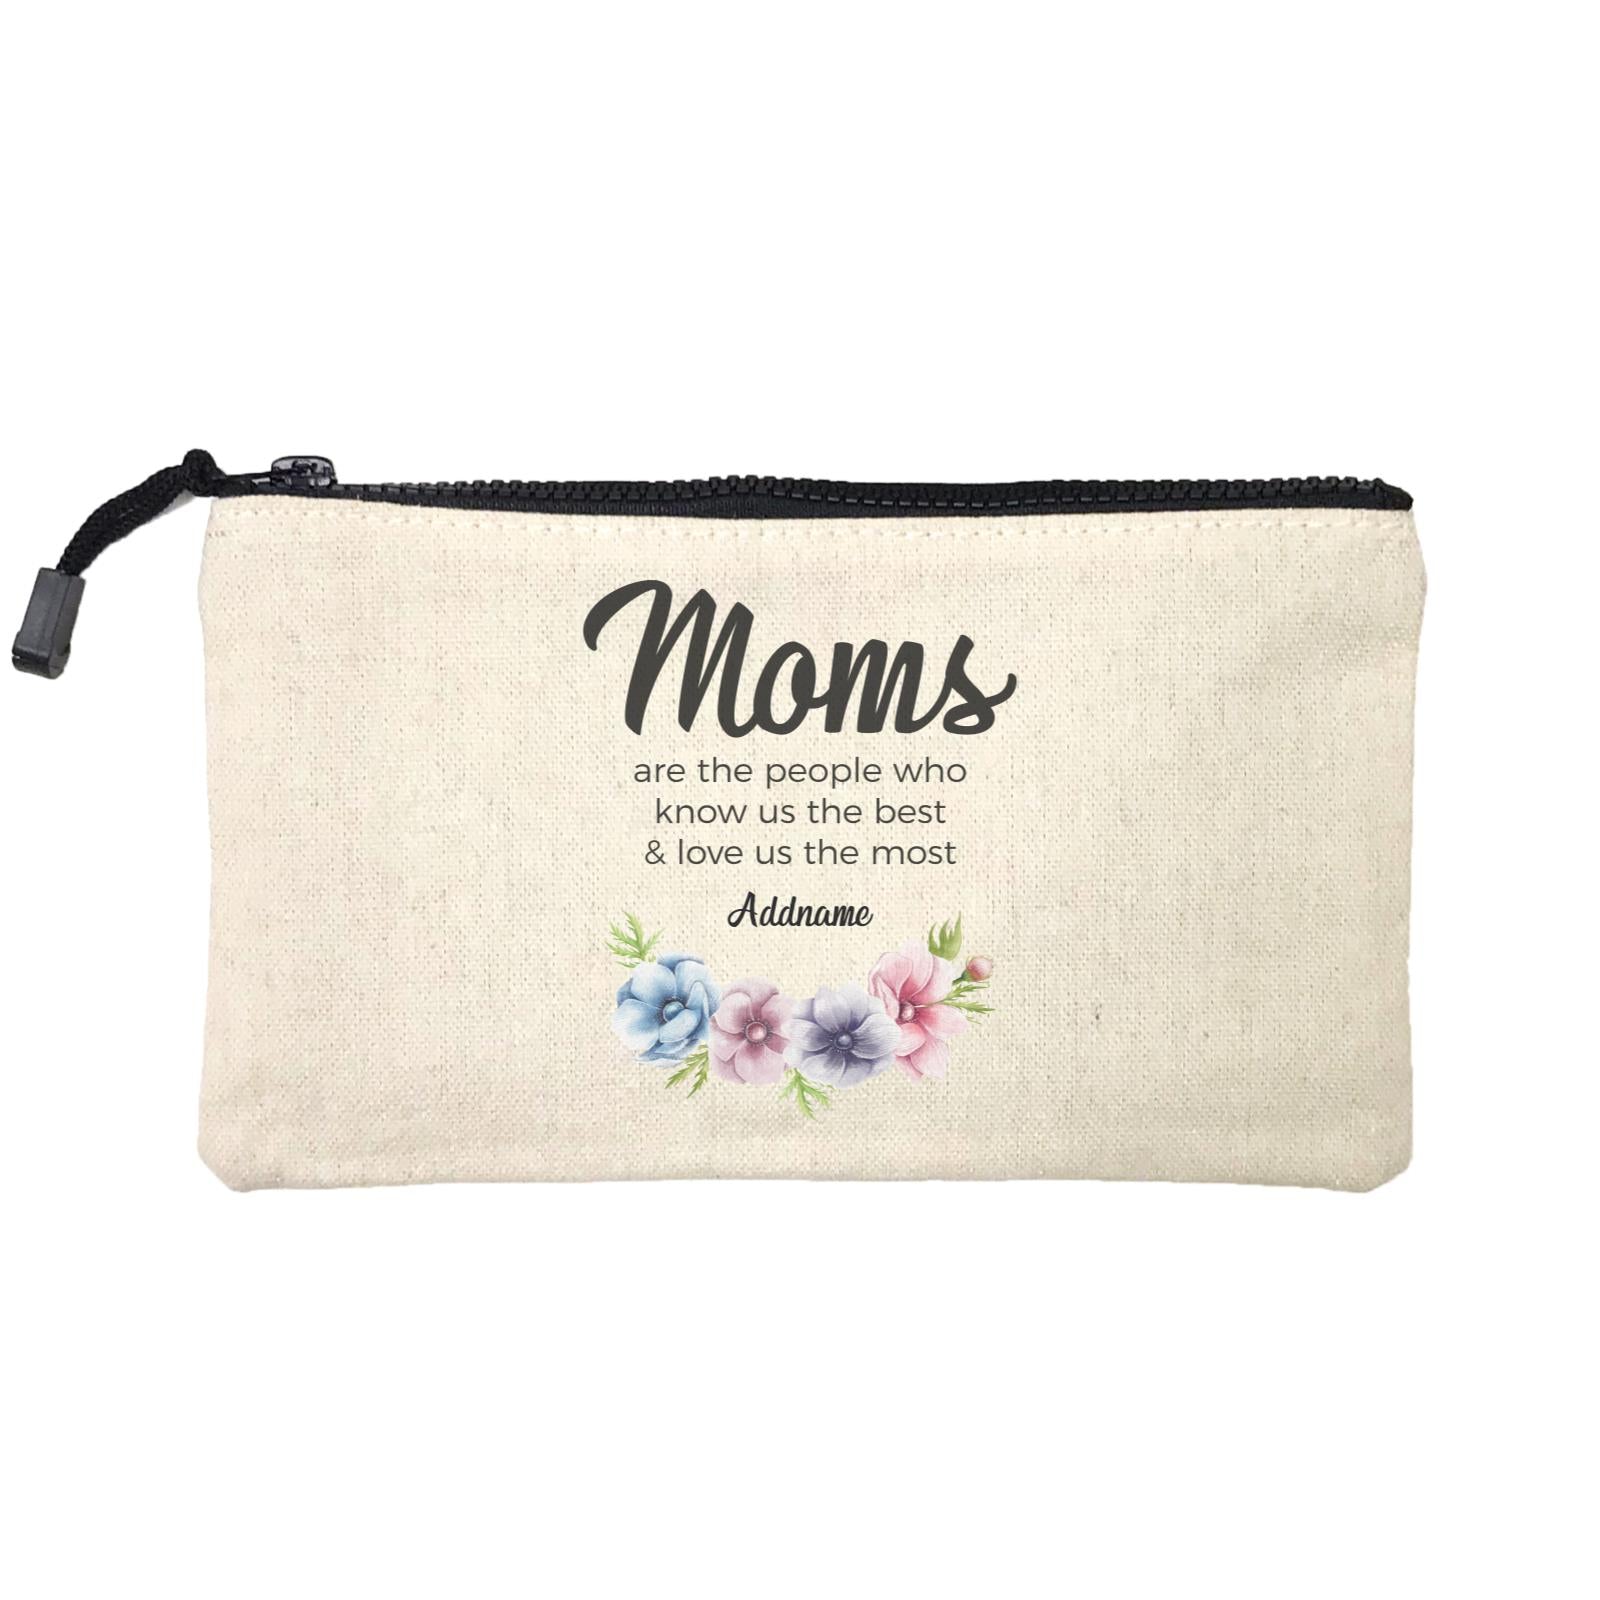 Sweet Mom Quotes 1 Moms Are The People Who Know Us The Best & Love Us The Most Addname Mini Accessories Stationery Pouch